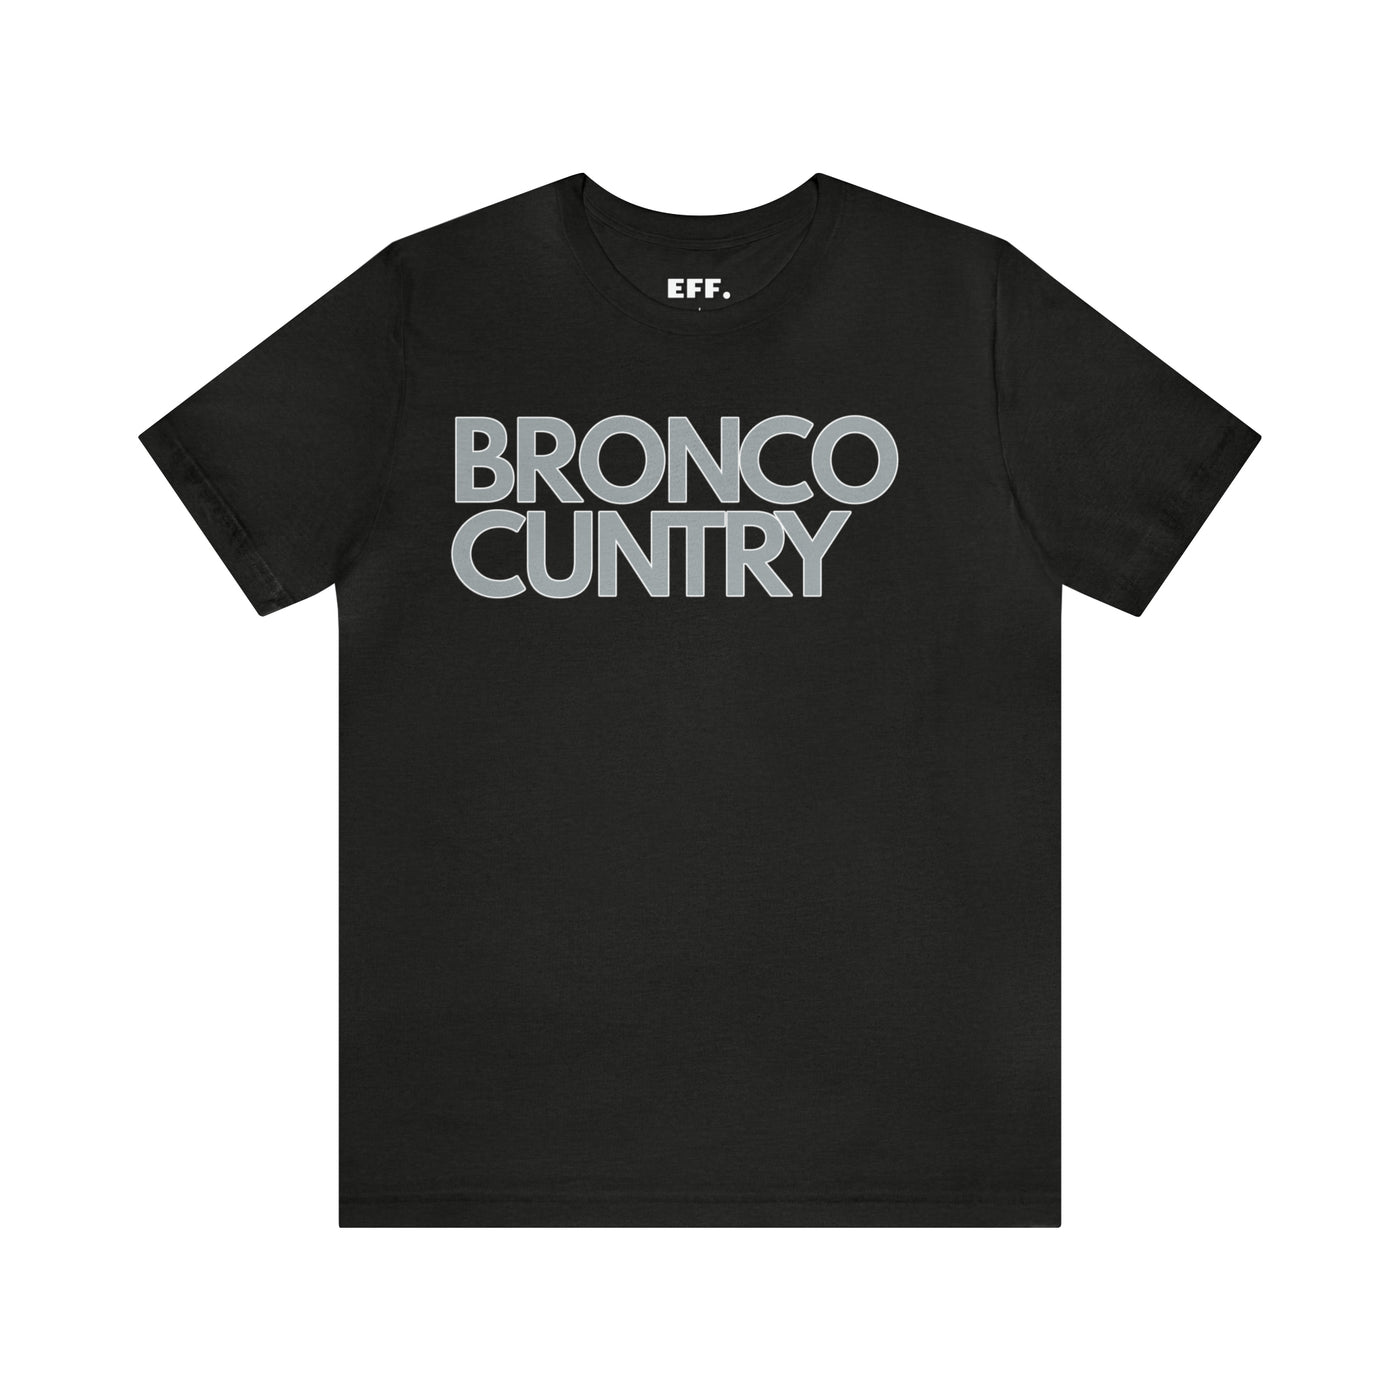 Bronco Cuntry